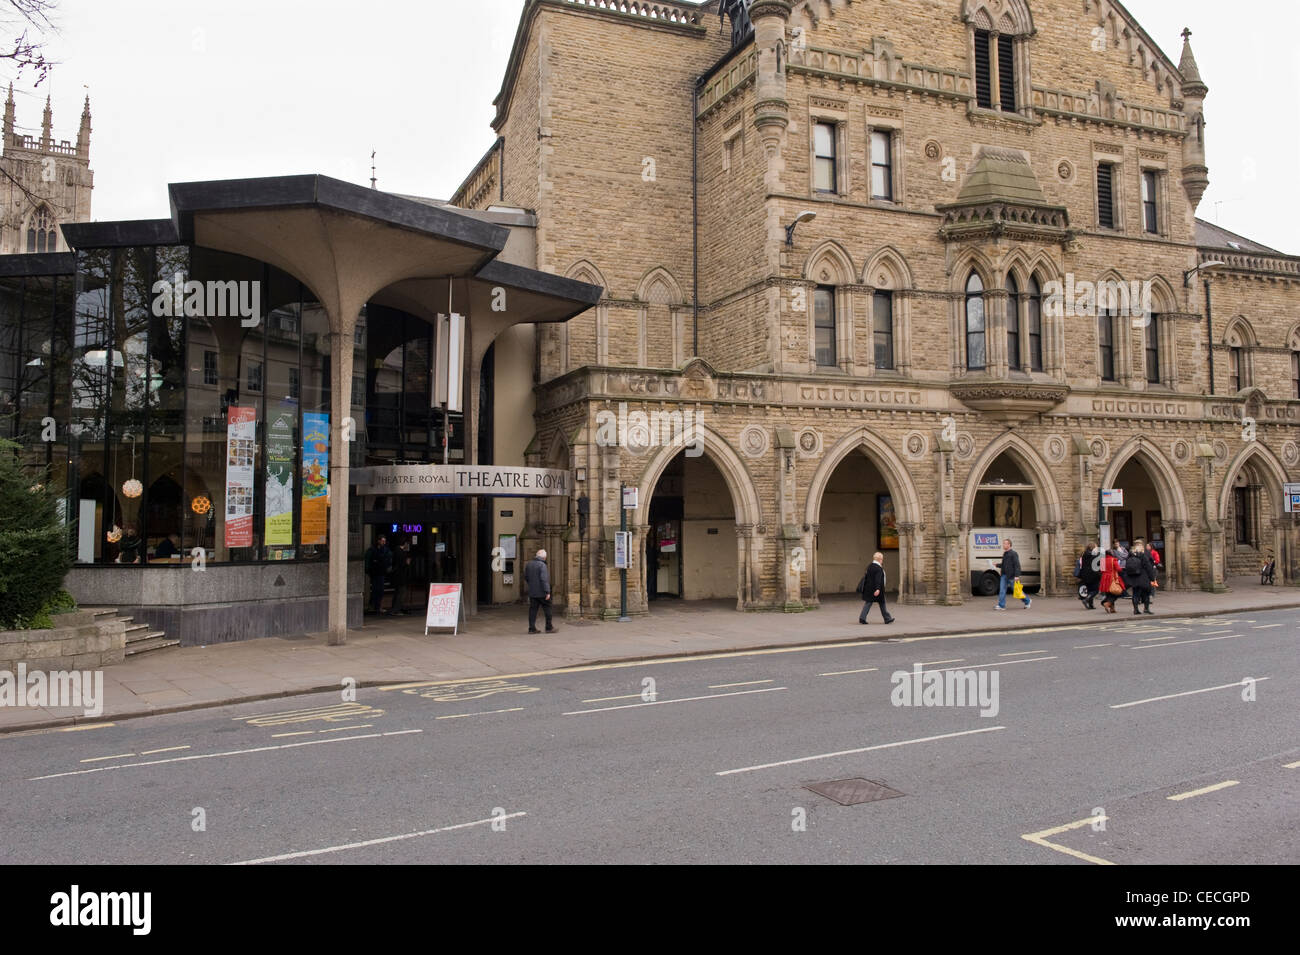 People walk past exterior of The Theatre Royal in York (historic building with Gothic frontage & Modernist extension) - North Yorkshire, England, UK. Stock Photo